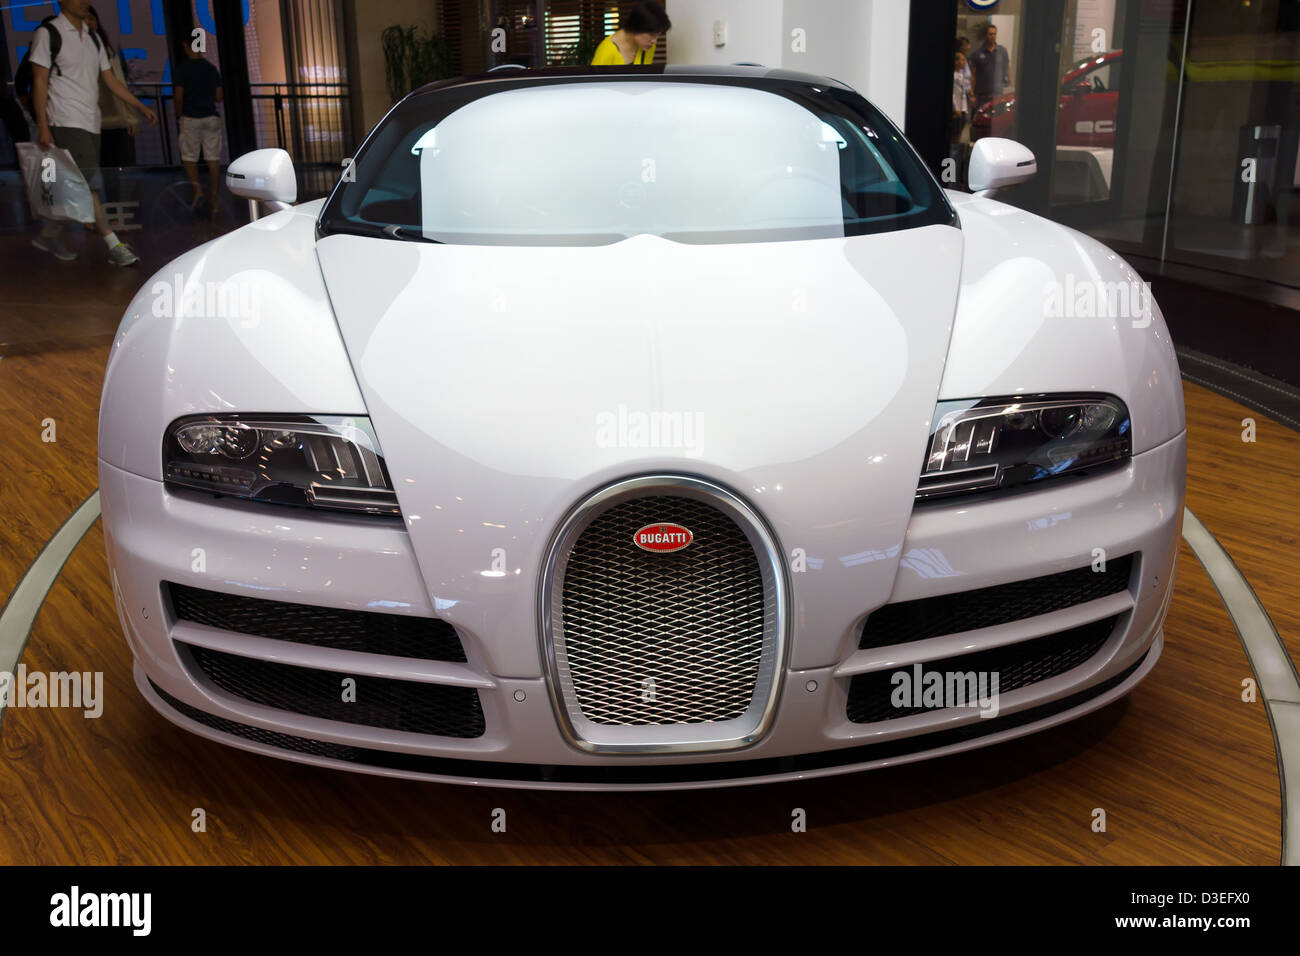 The Bugatti Veyron EB 16.4 is a mid-engined grand touring car. Bugatti Veyron - the fastest car in the world. Stock Photo